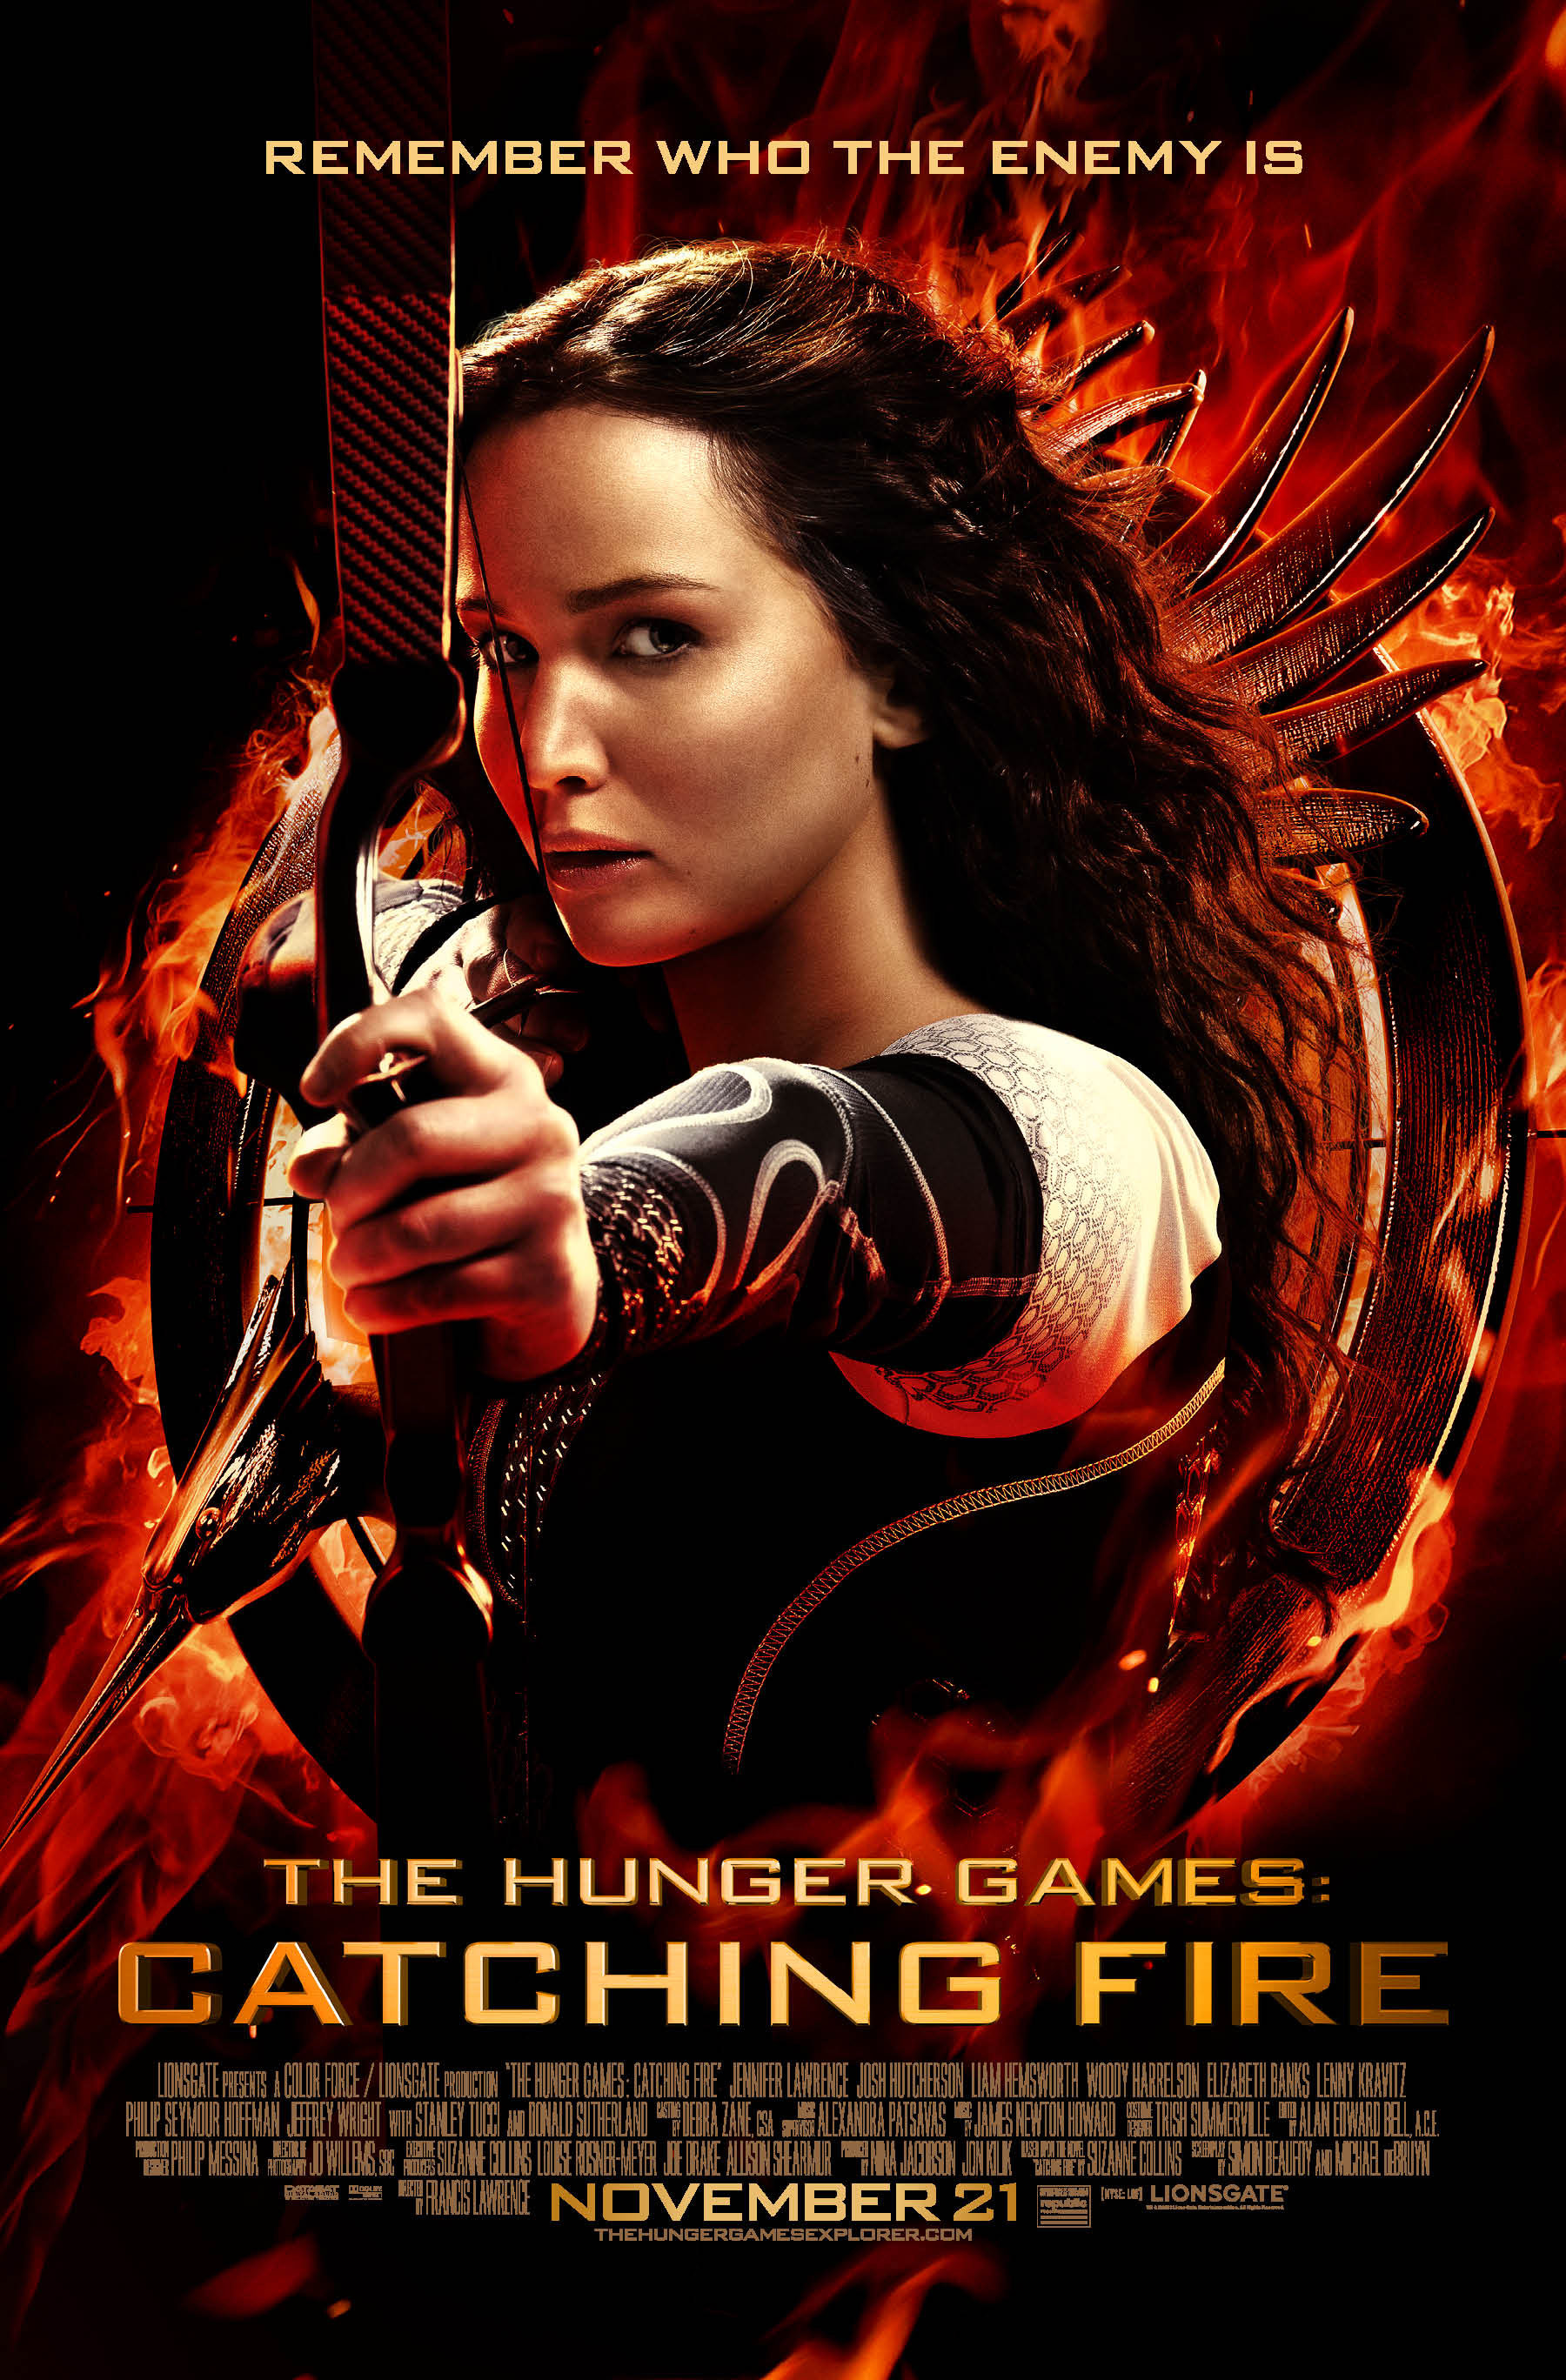 Film Review: The Hunger Games: Catching Fire